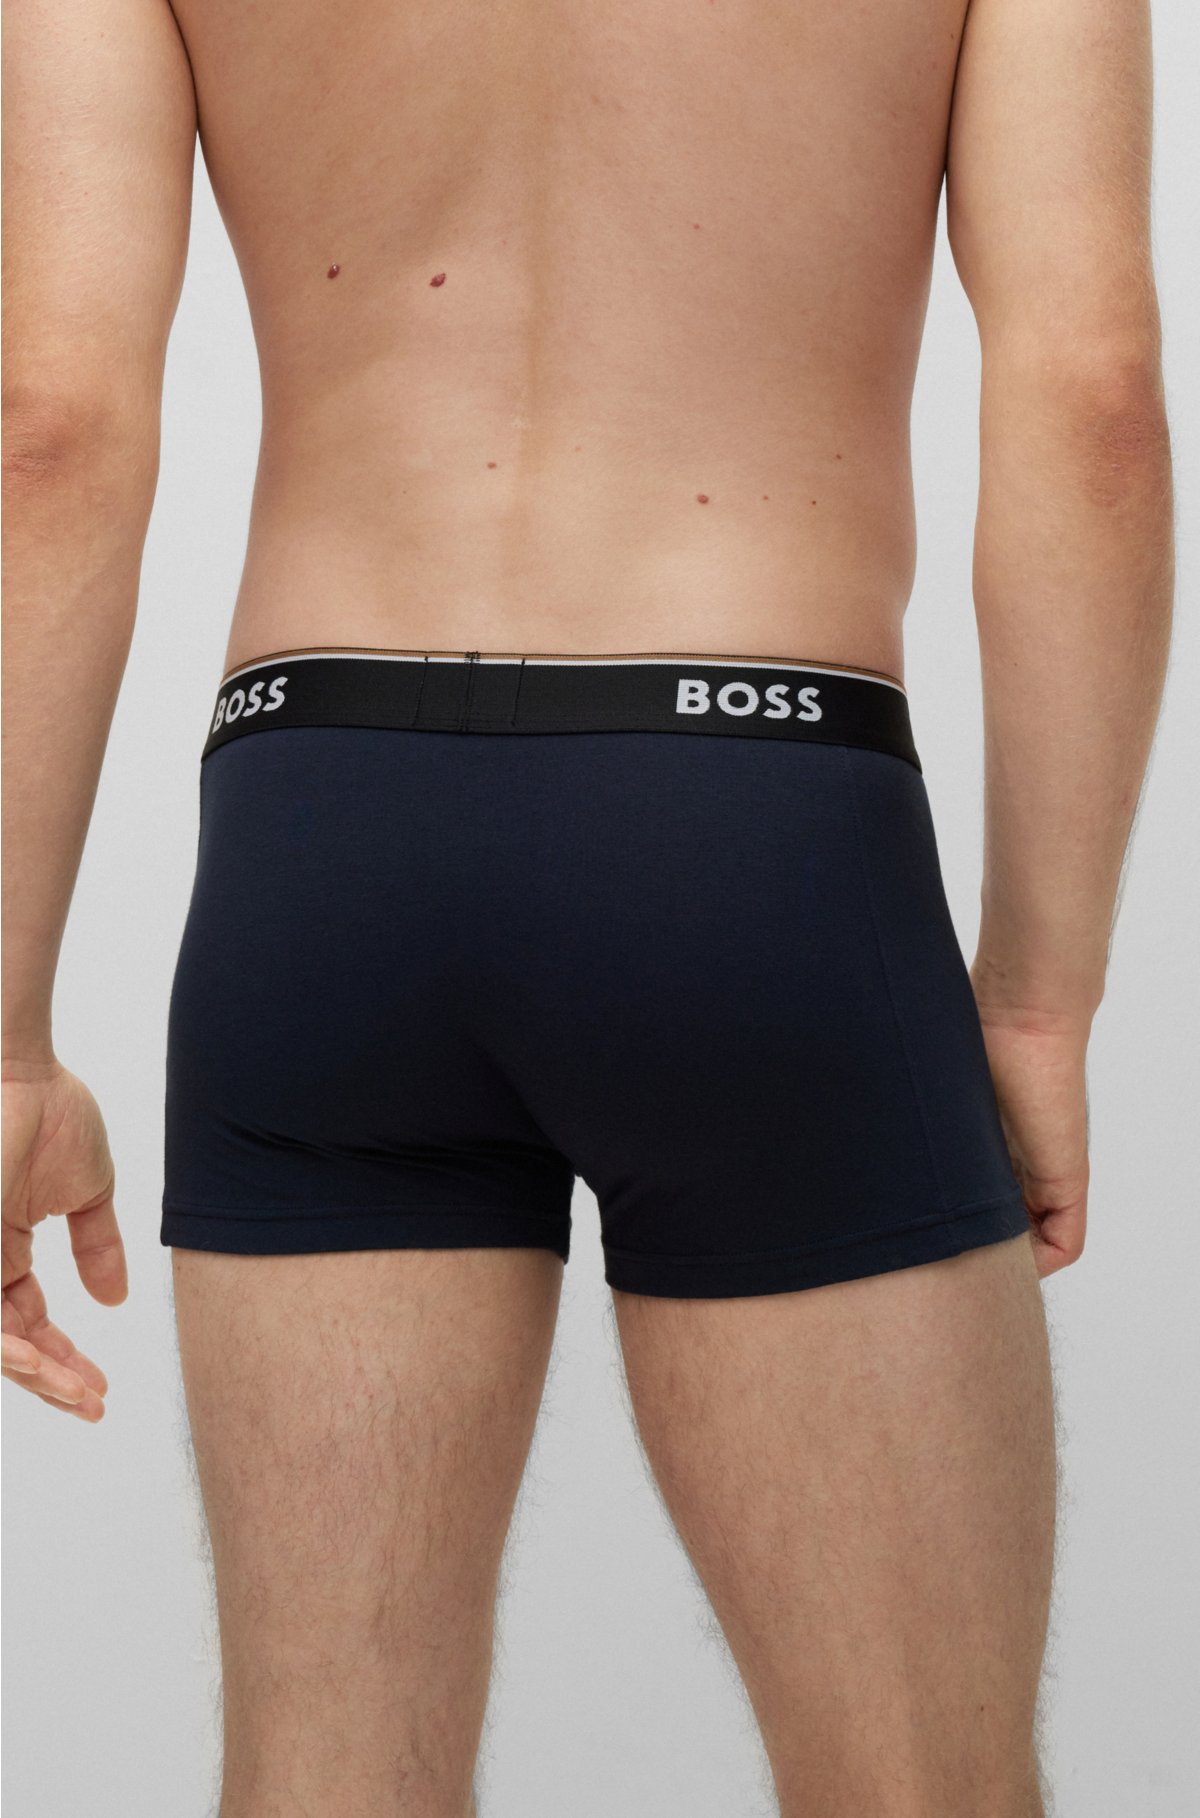 of - waistbands stretch-cotton logo trunks BOSS with Triple-pack